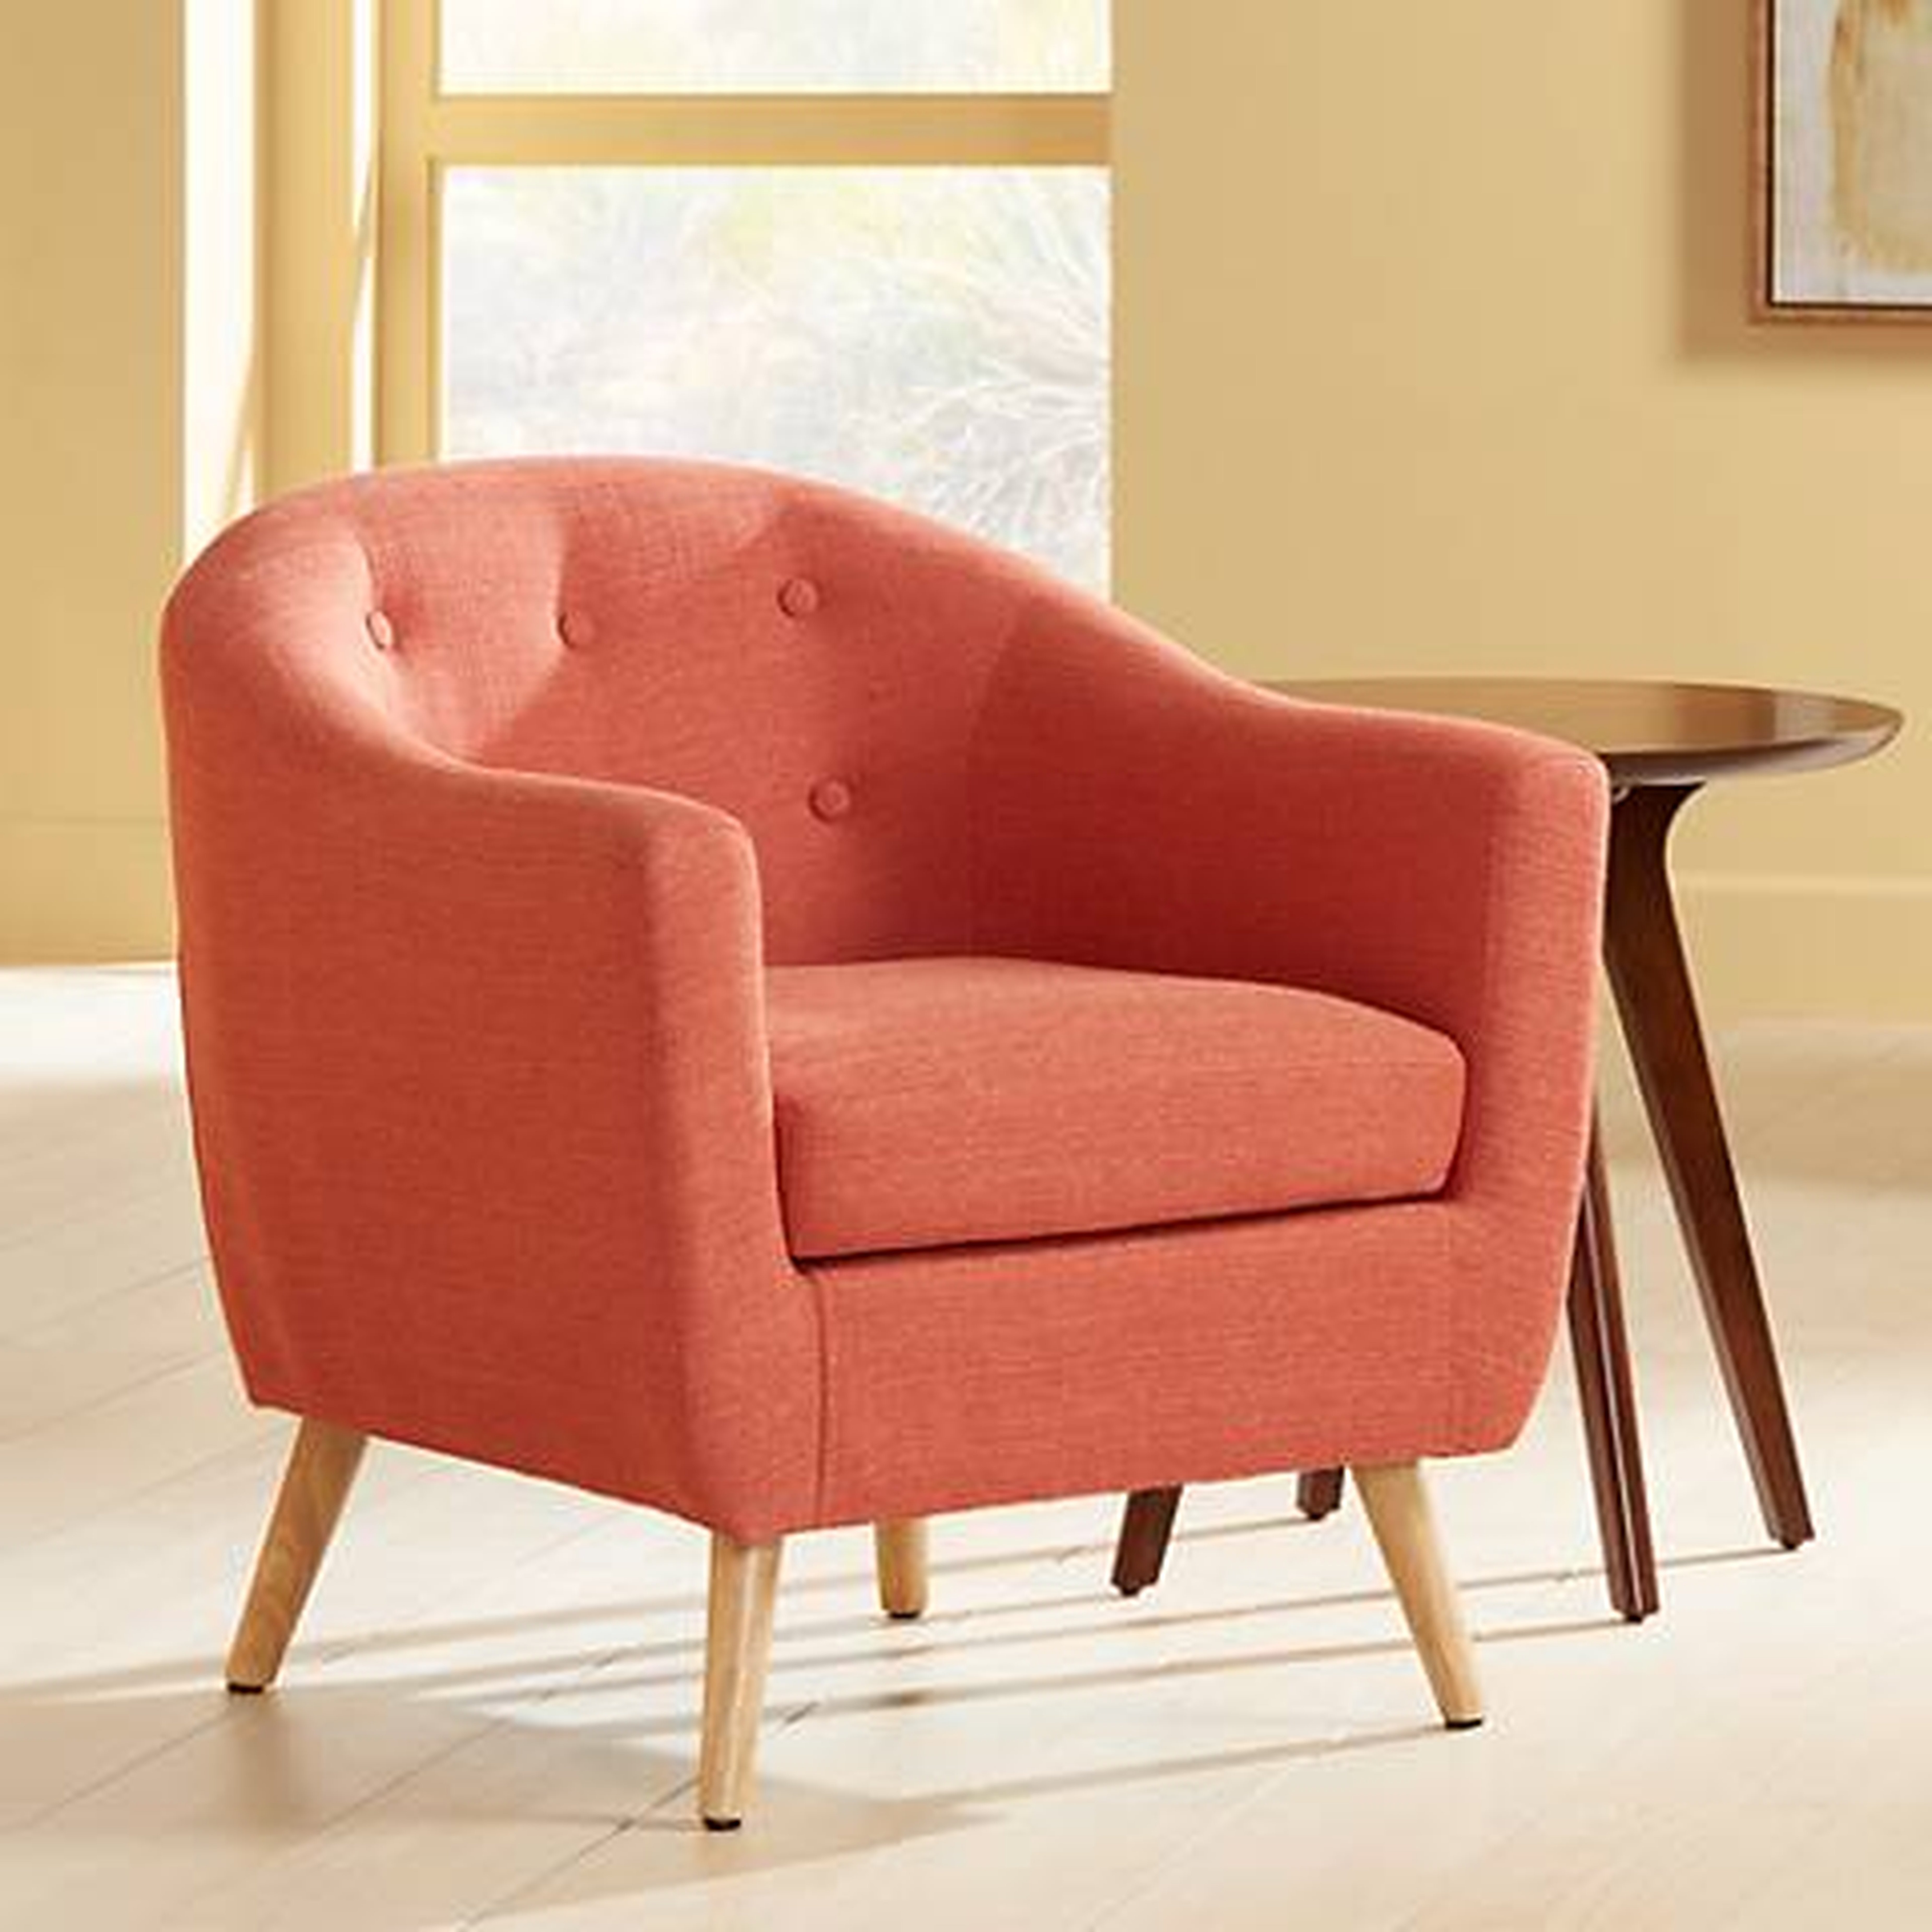 Rockwell Upholstered Accent Chair orange - Lamps Plus